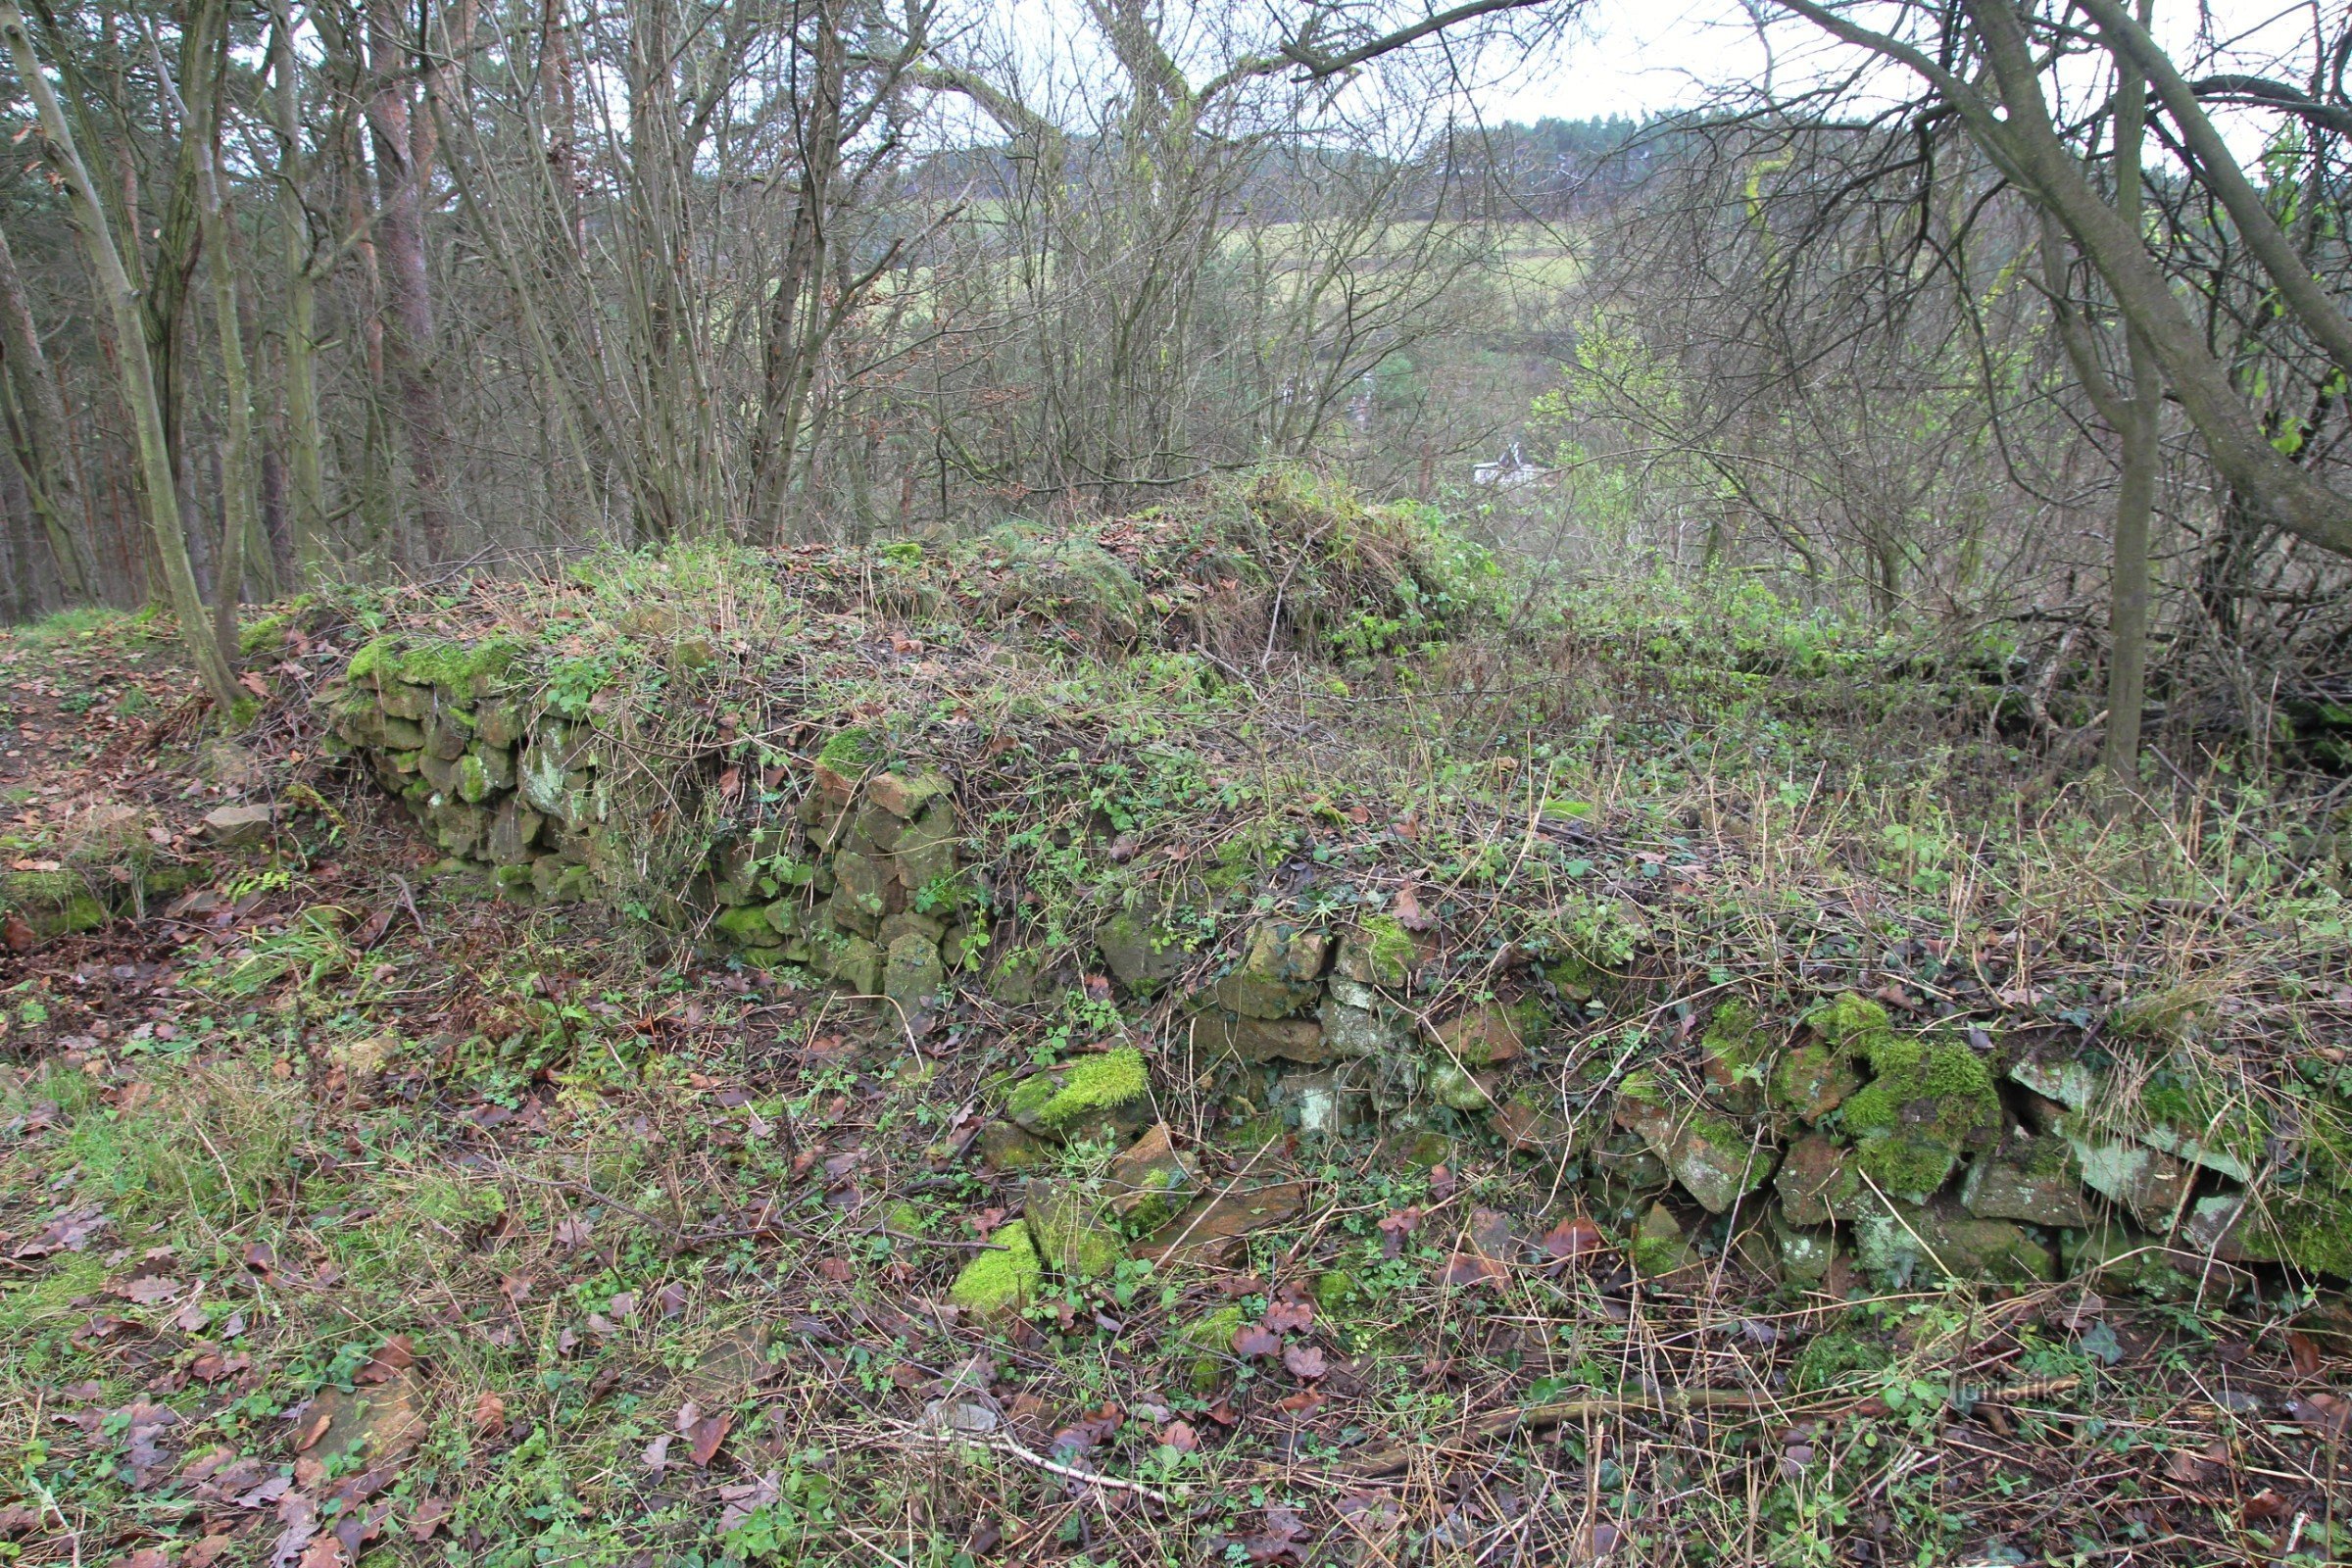 The foundations of the medieval castle are still visible today